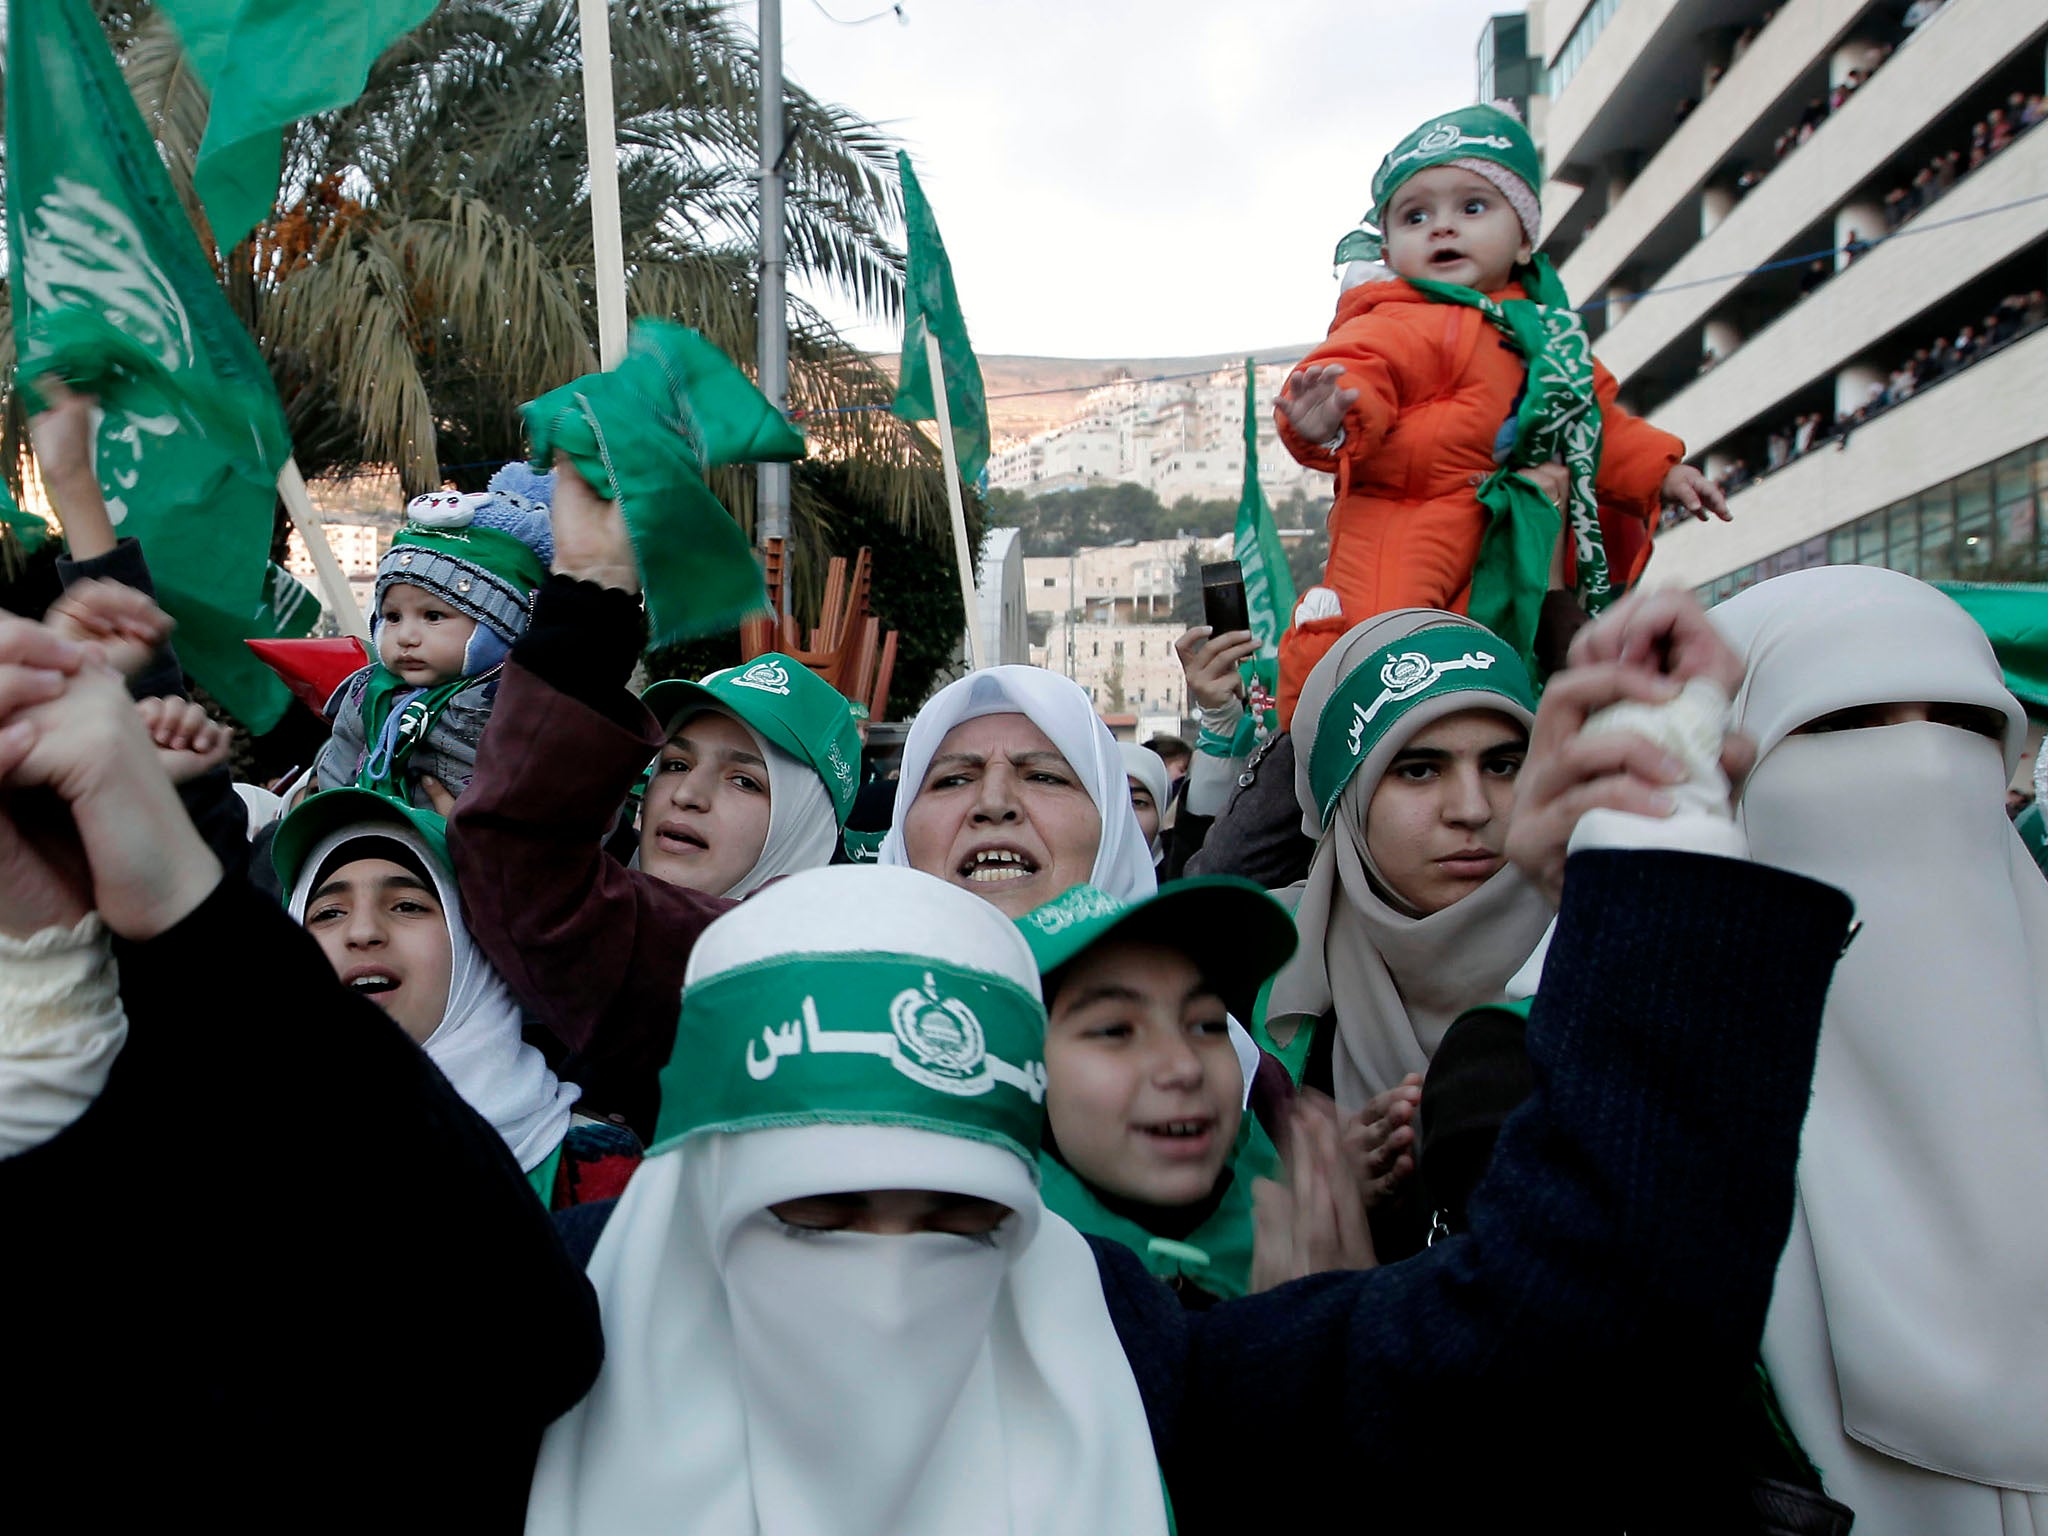 Thousands gathered for the militant Islamist group's first permitted rally in the West Bank in five years